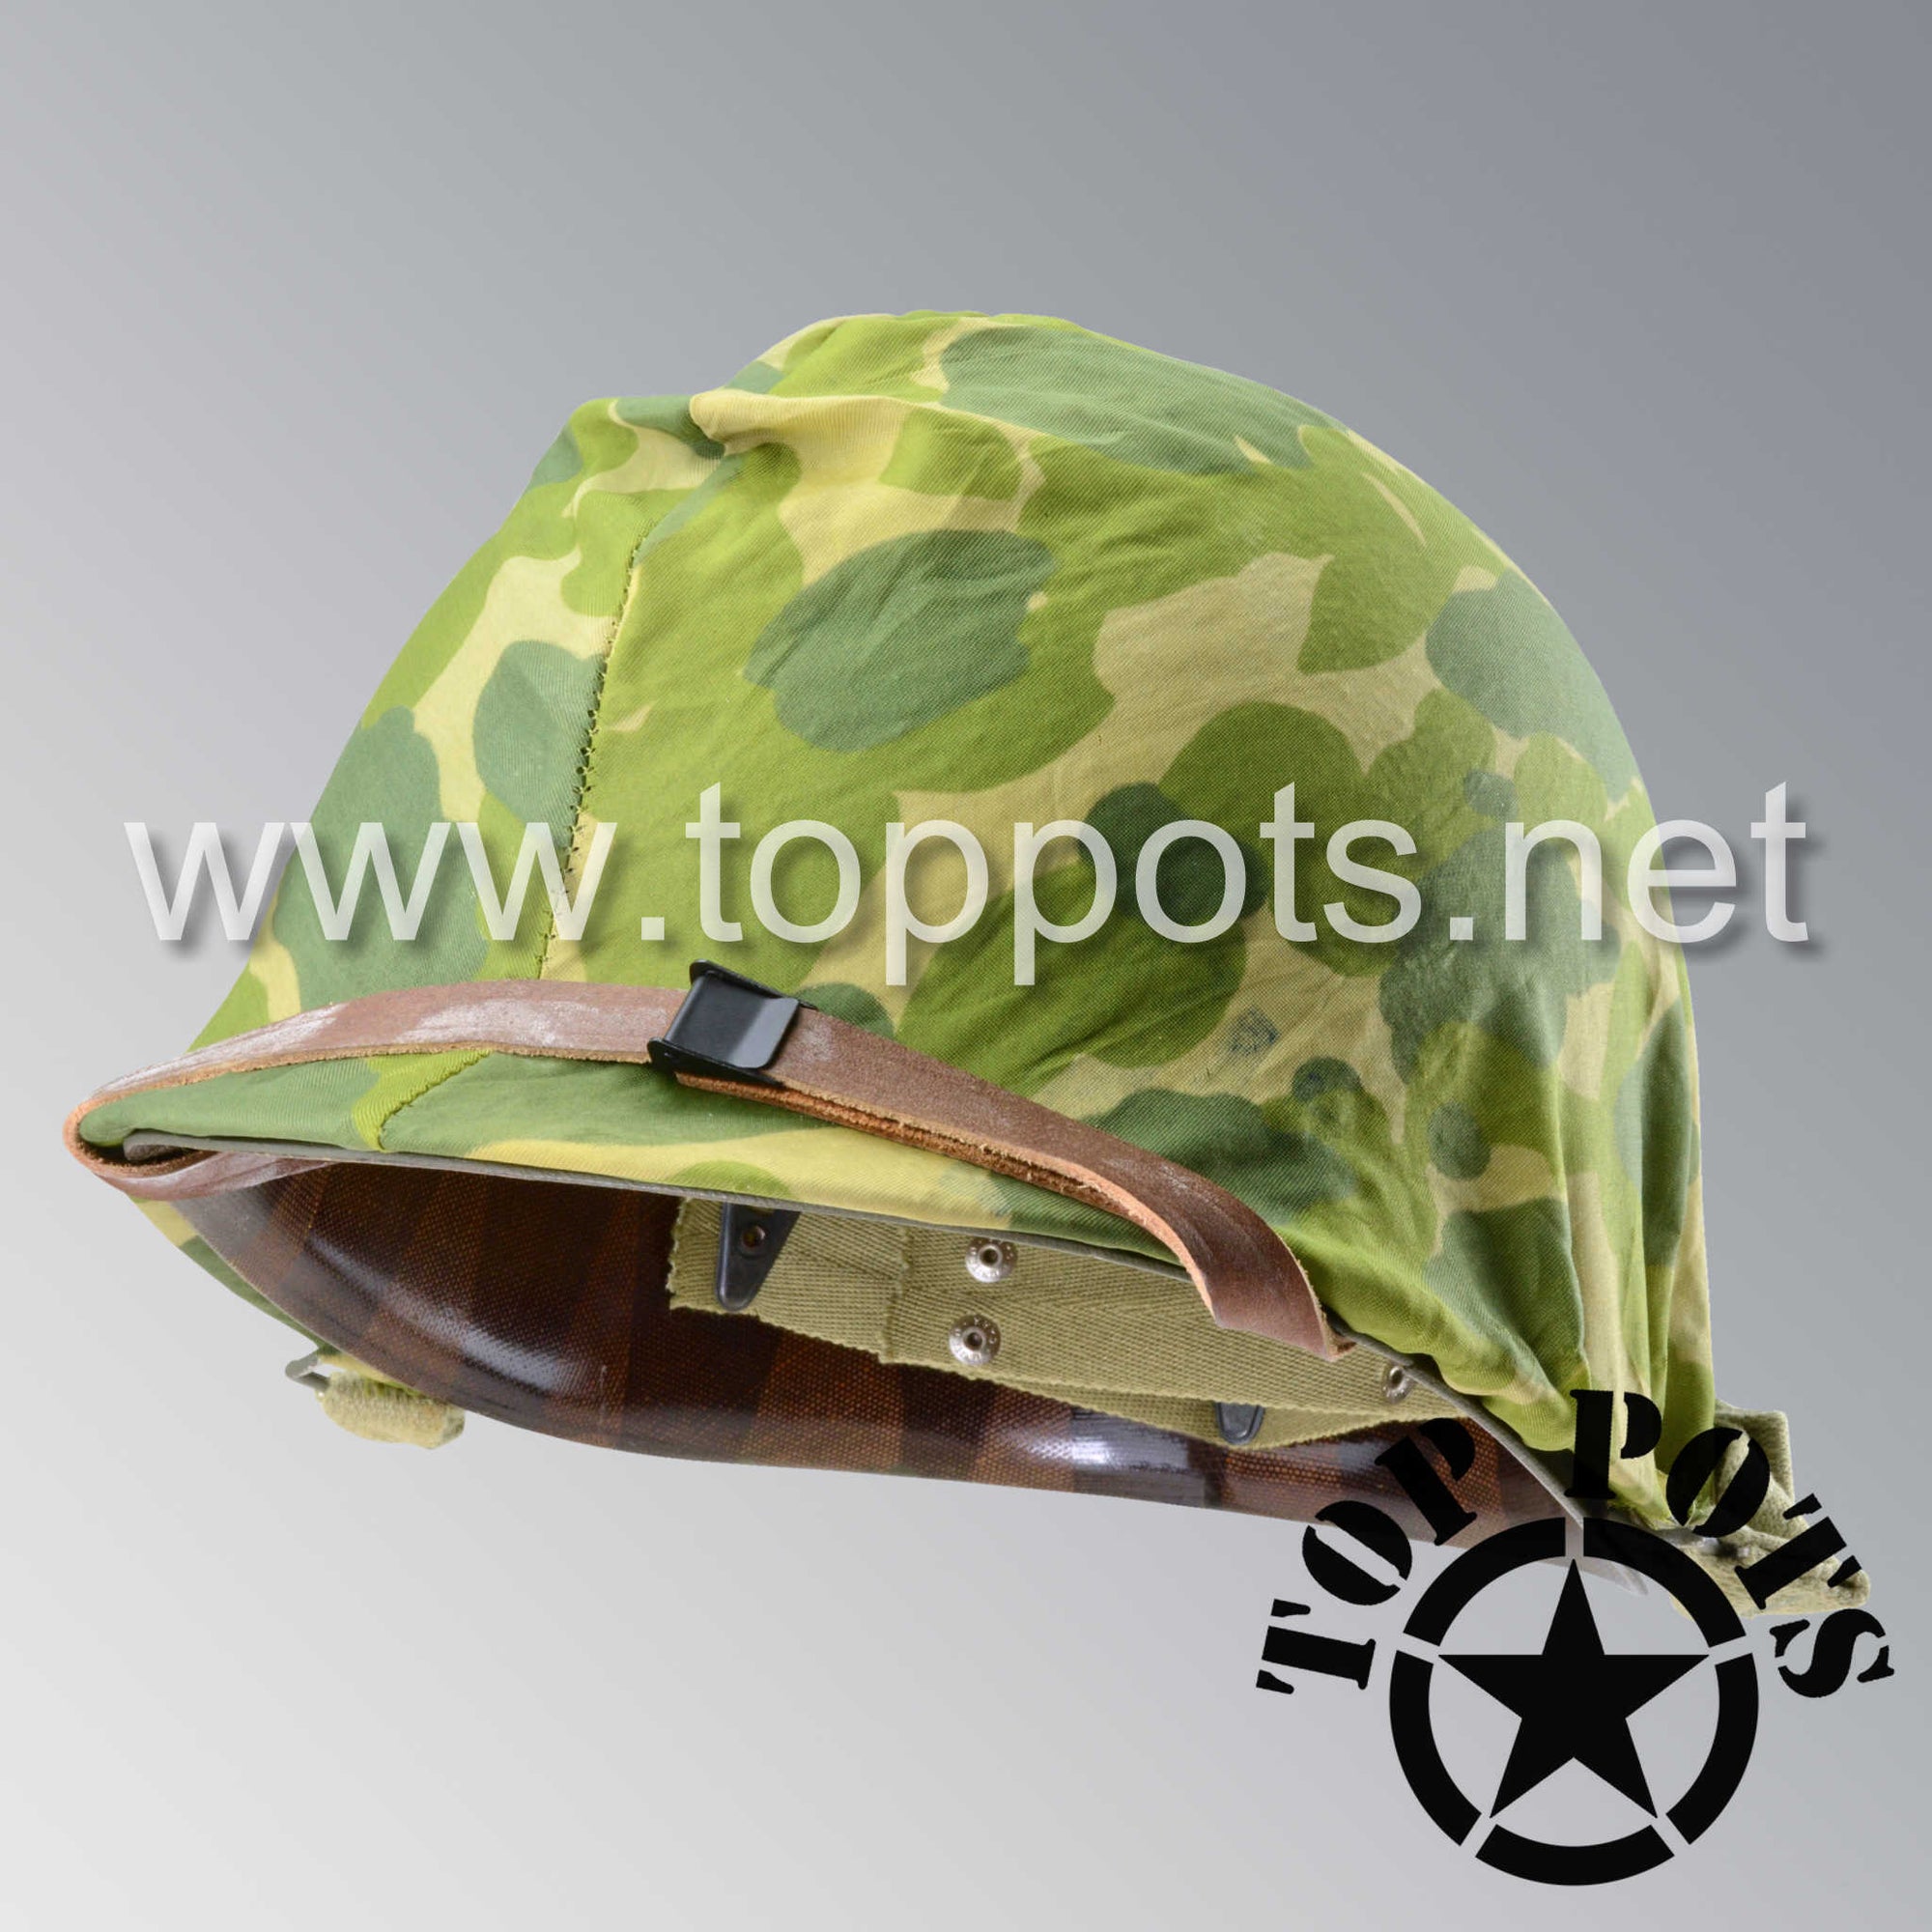 WWII US Army Restored Original M1 Infantry Helmet Swivel Bale Shell and Liner with Parachute Canopy Camouflage Cover